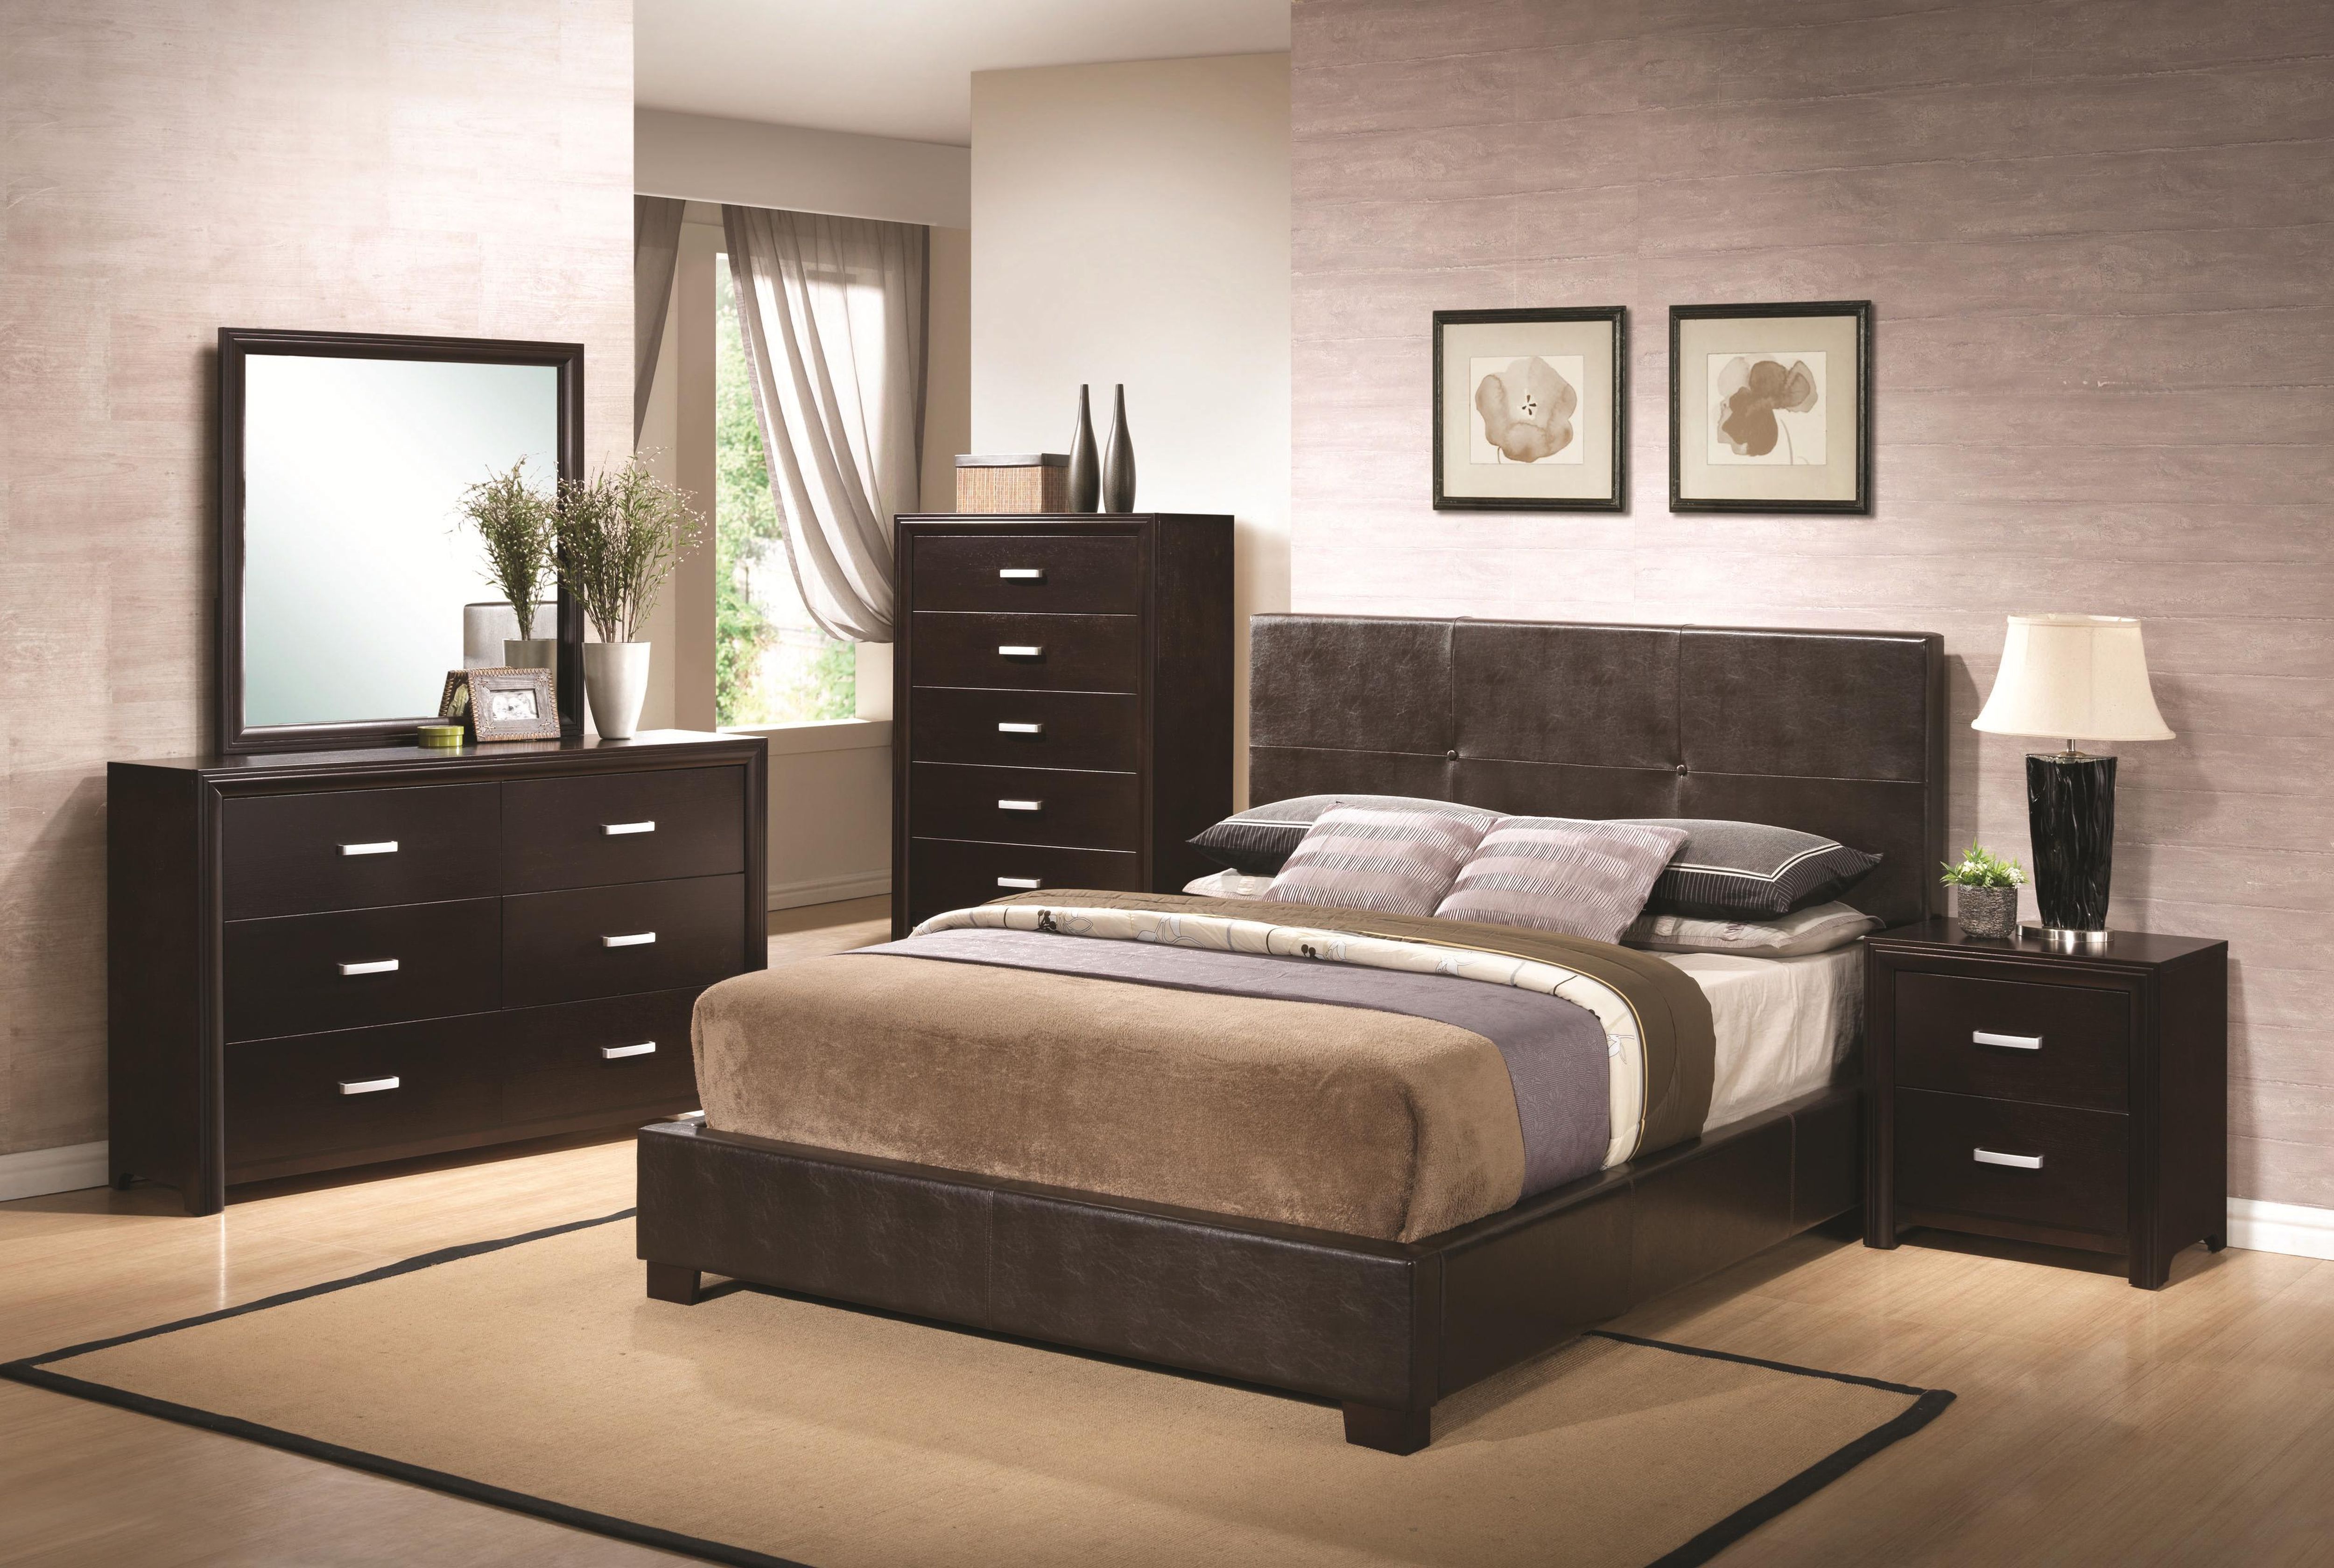 Modern Ikea Bedroom Ideas For Men with Simple Decor